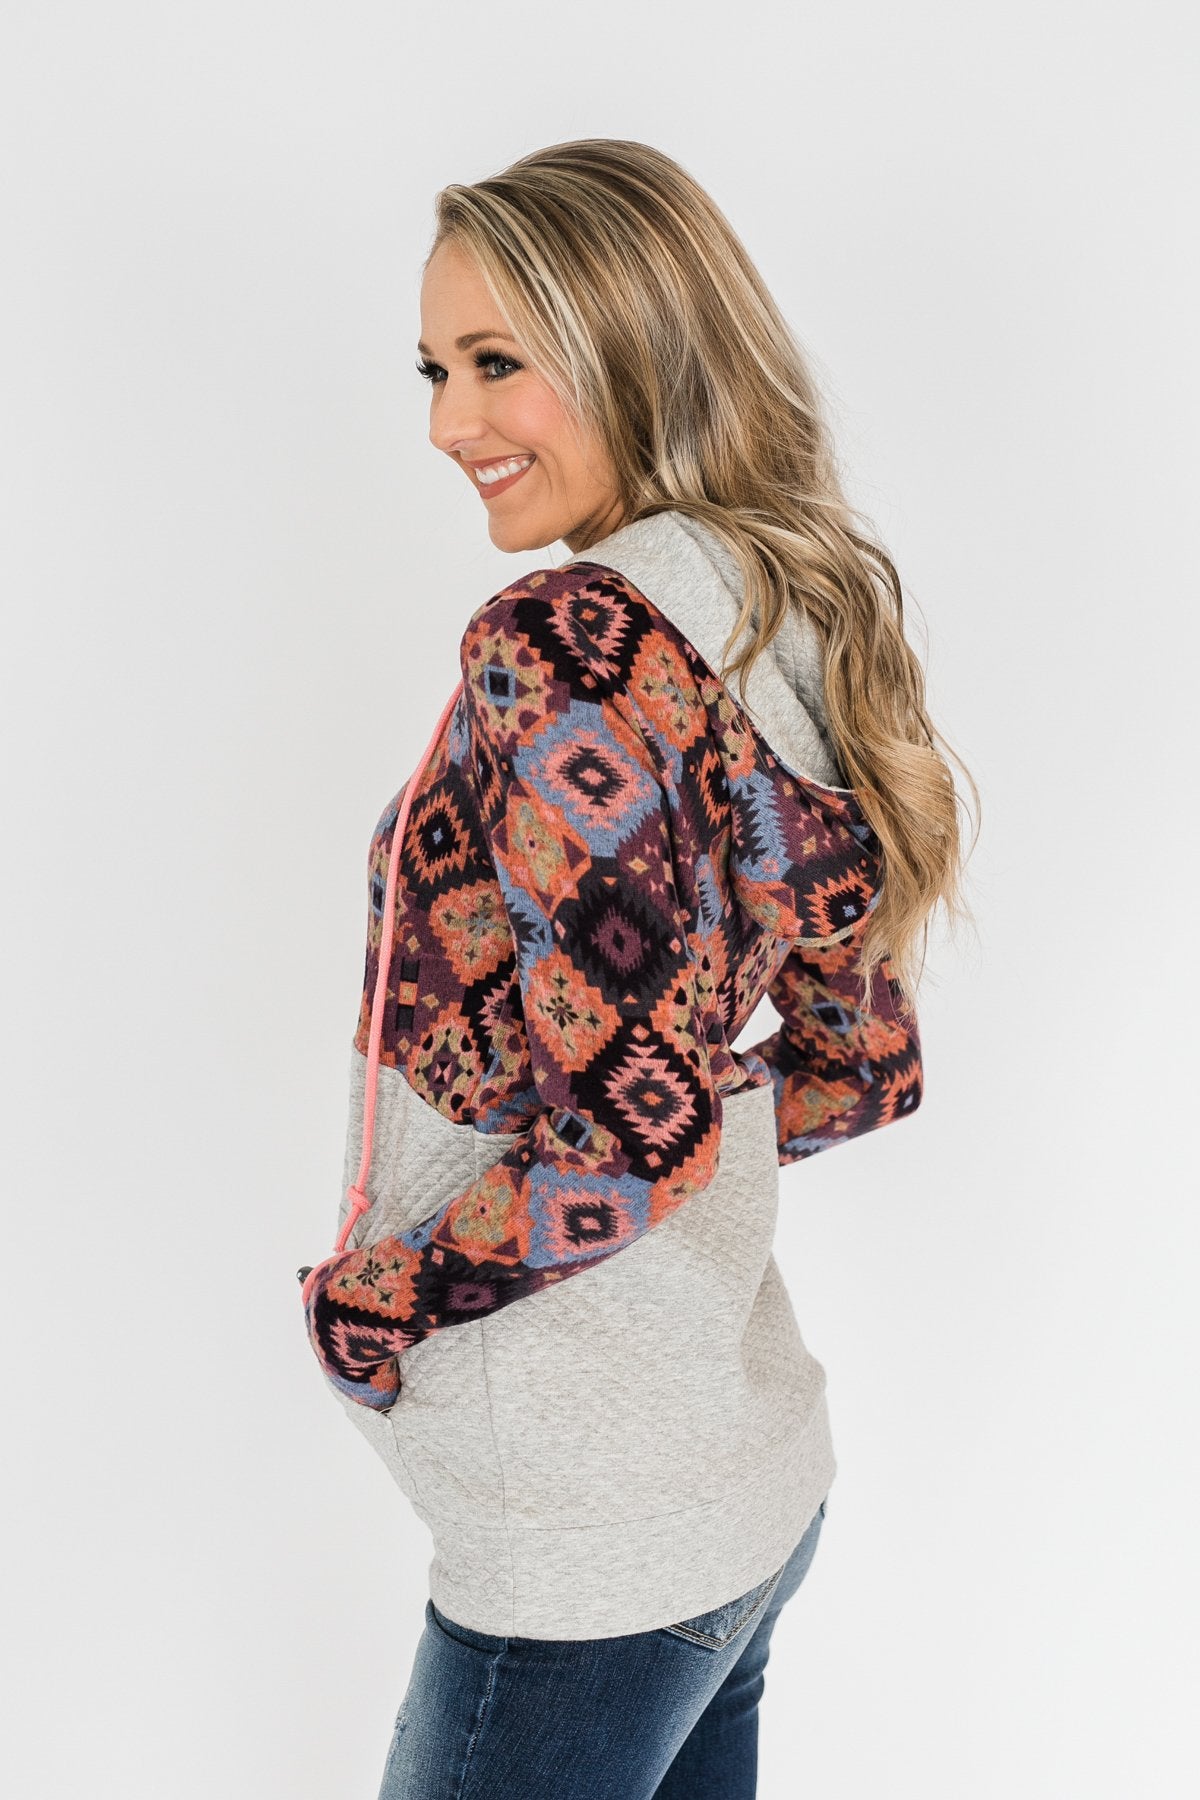 Aztec Quilted Drawstring Hoodie- Grey, Pink, & Purple Tones – The Pulse ...